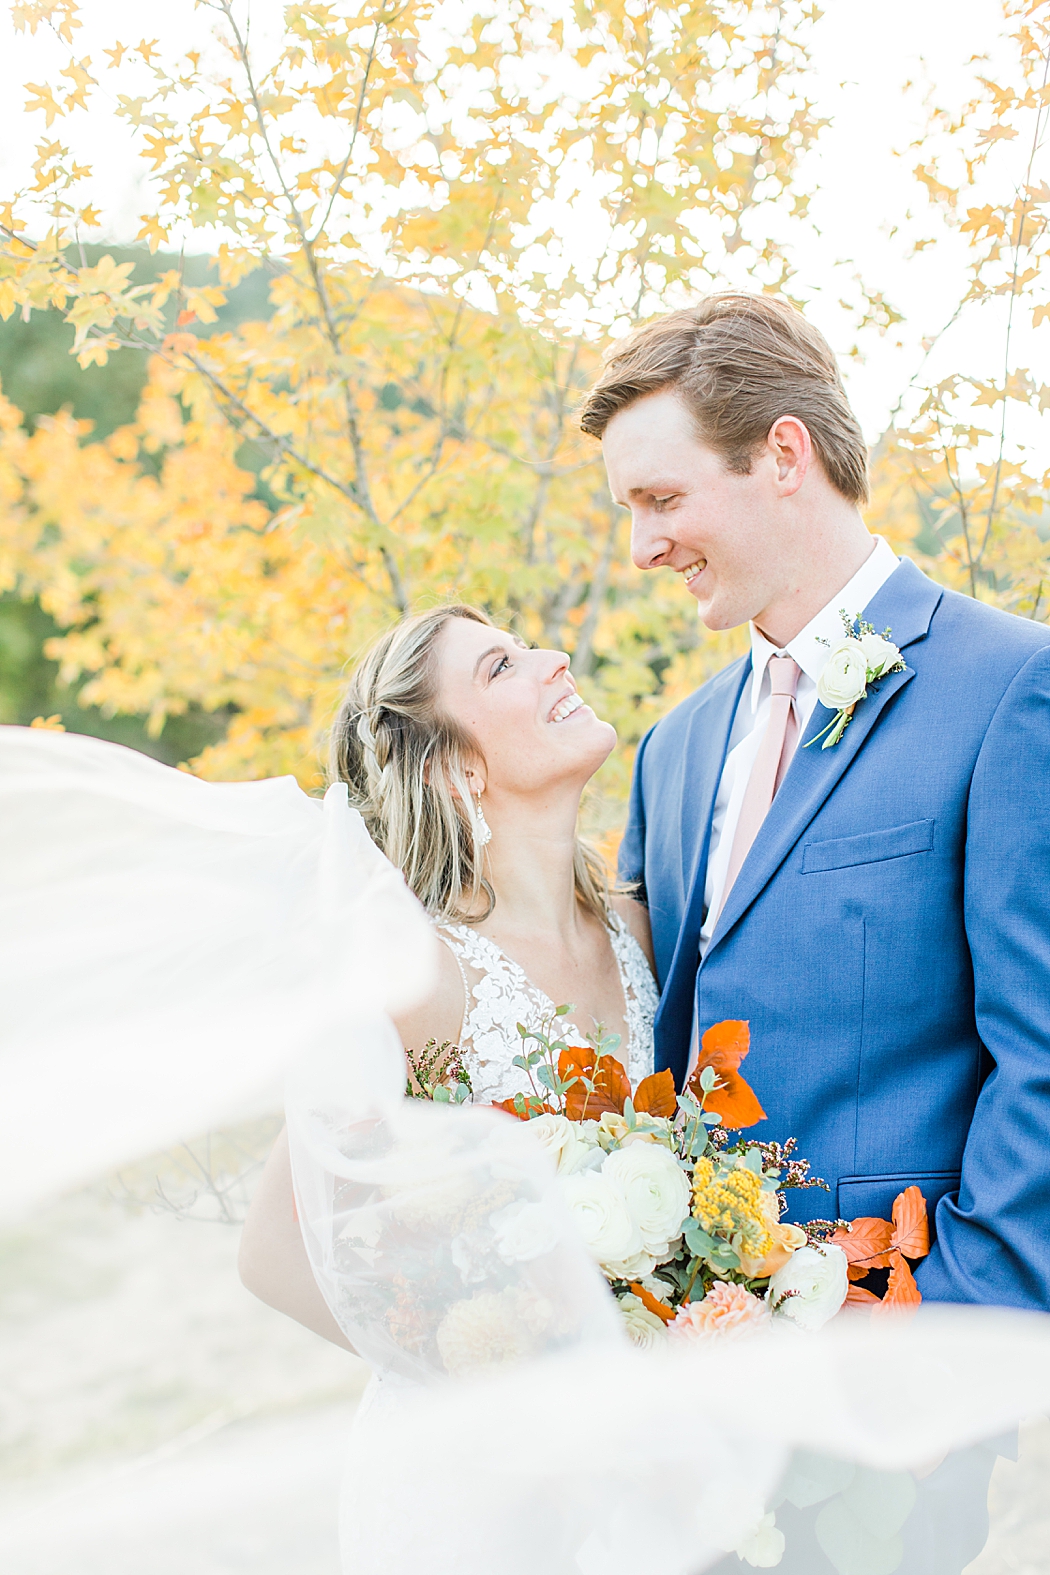 Terra Cotta Fall Micro Wedding in Kerrville Texas at a private estate in the Hill Country by Allison Jeffers Photography 0070